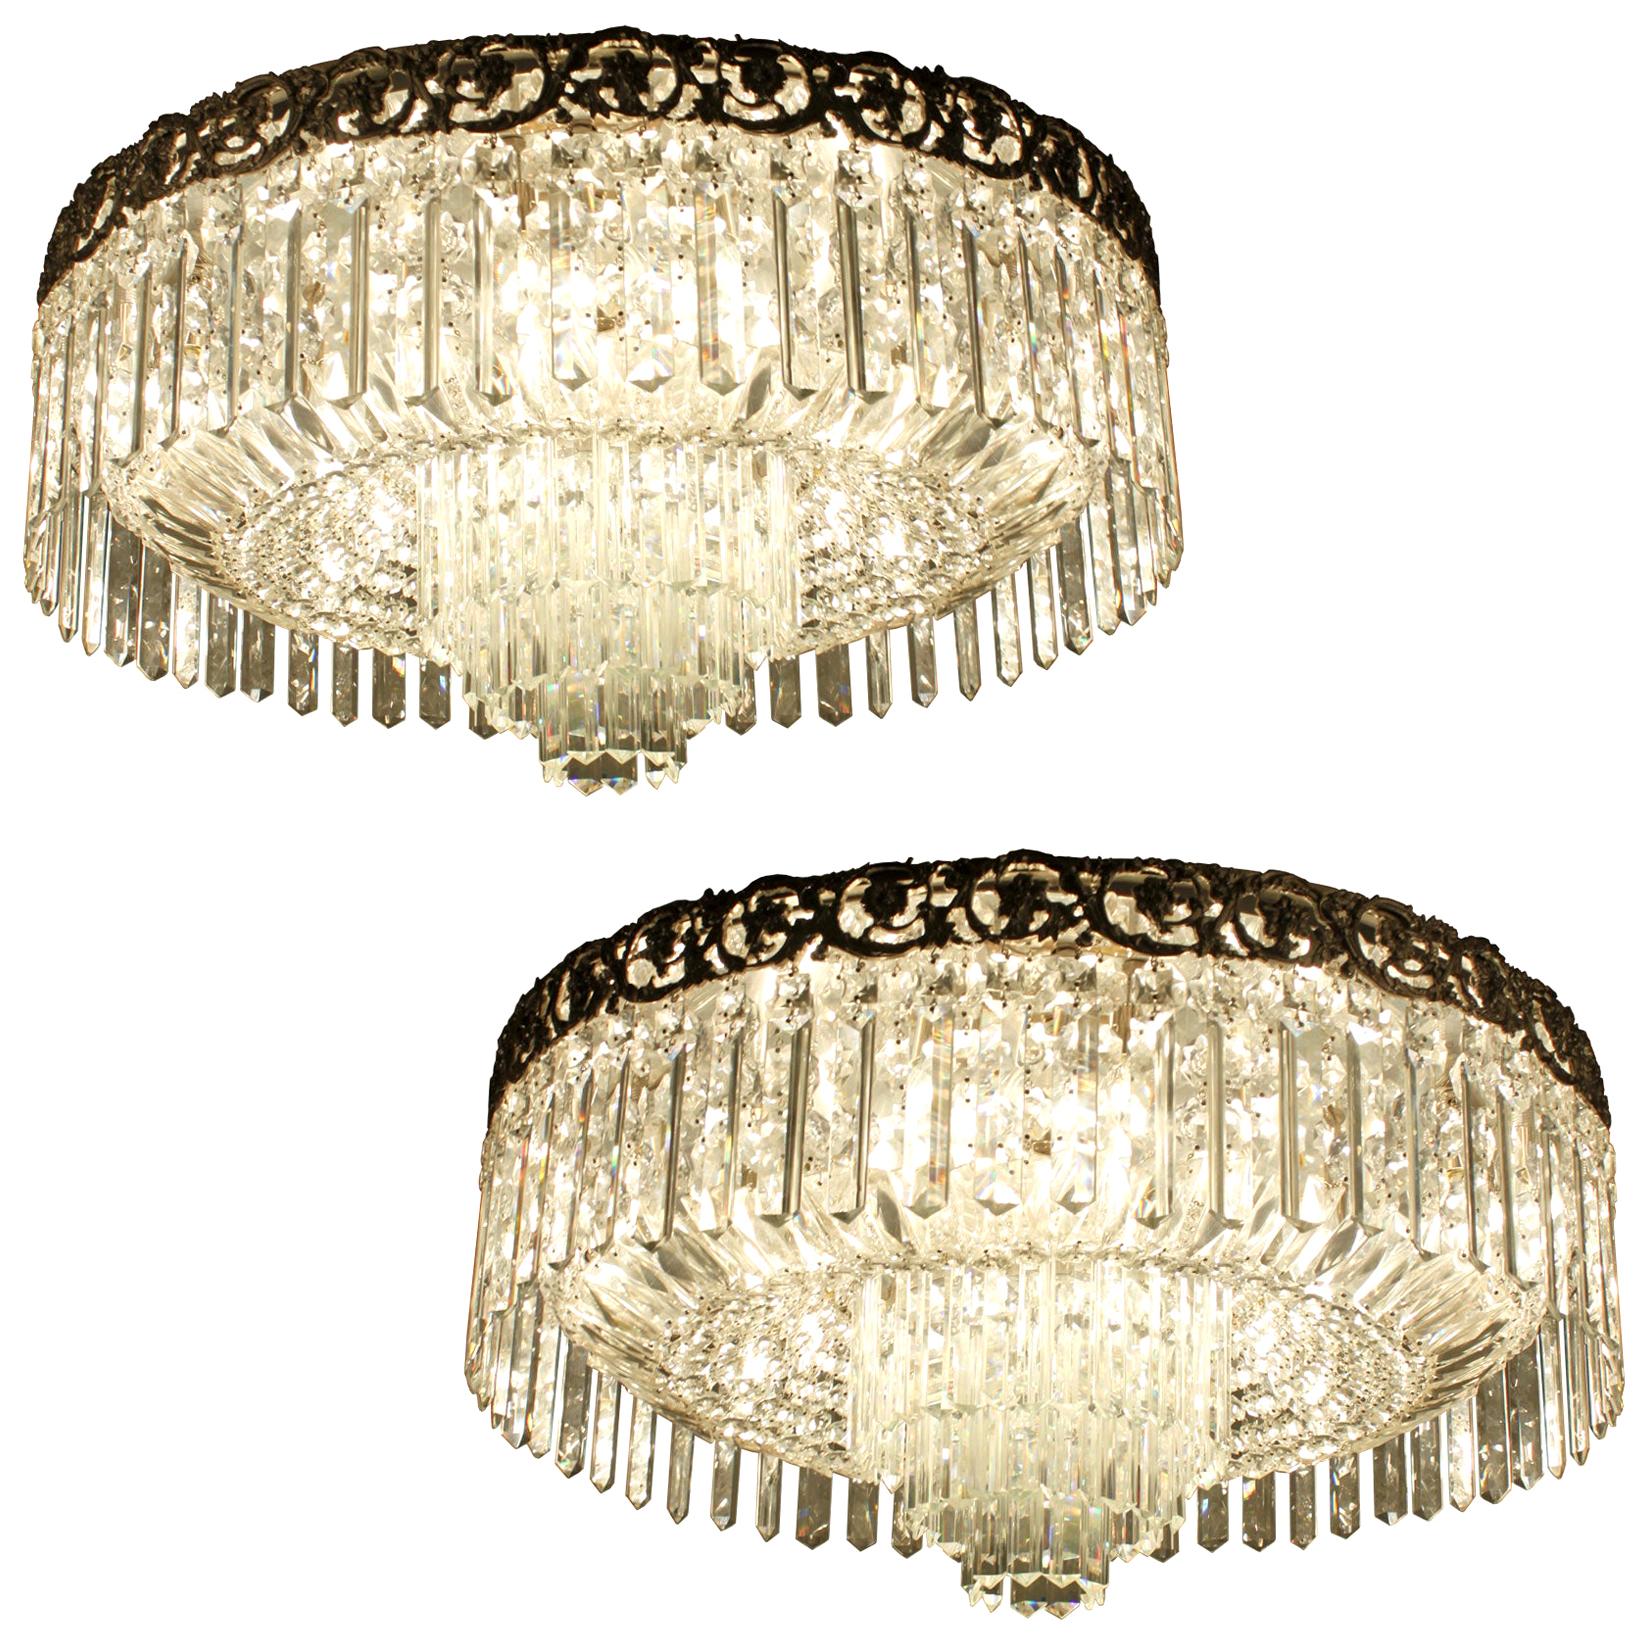 Beautiful Pair of Baccarat Crystal Art Nouveau Silver Chandeliers